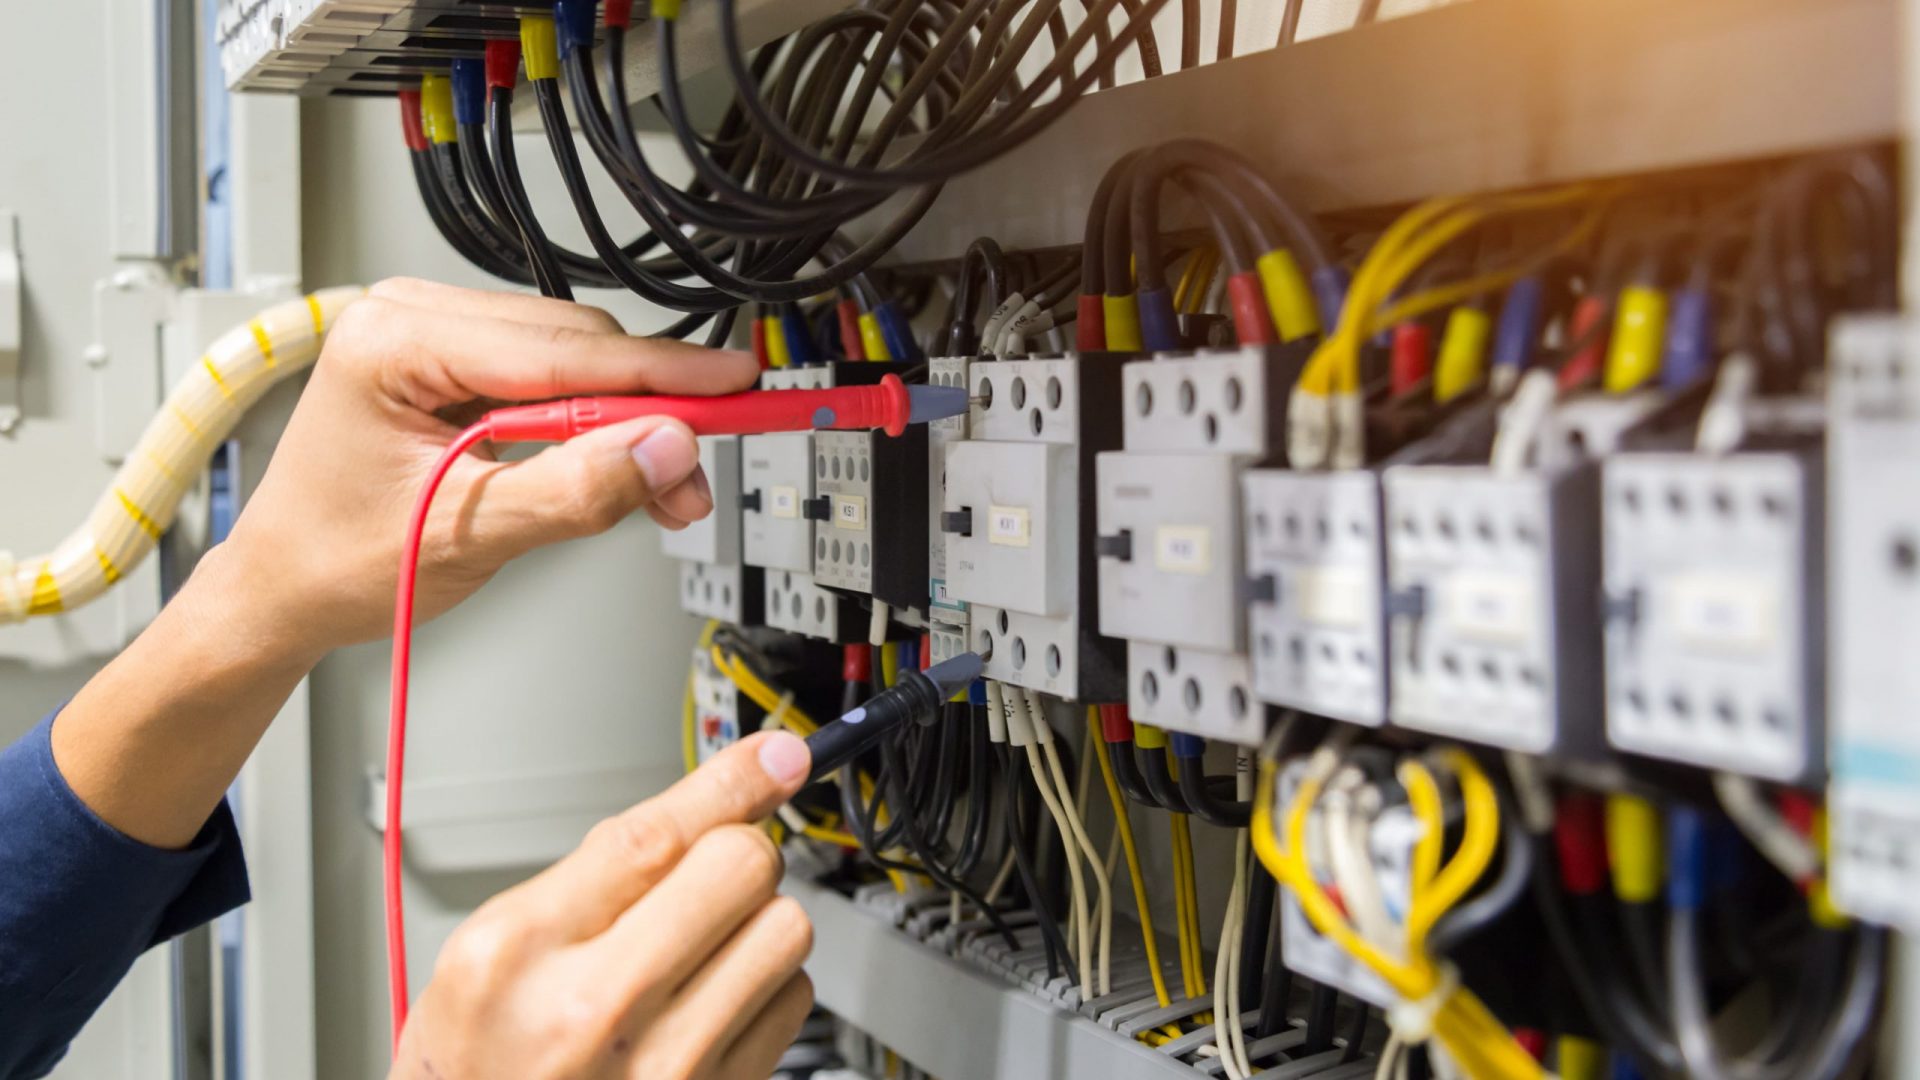 Learn the Basics of Home Electrical Wiring - [Wiring Installation Guide]